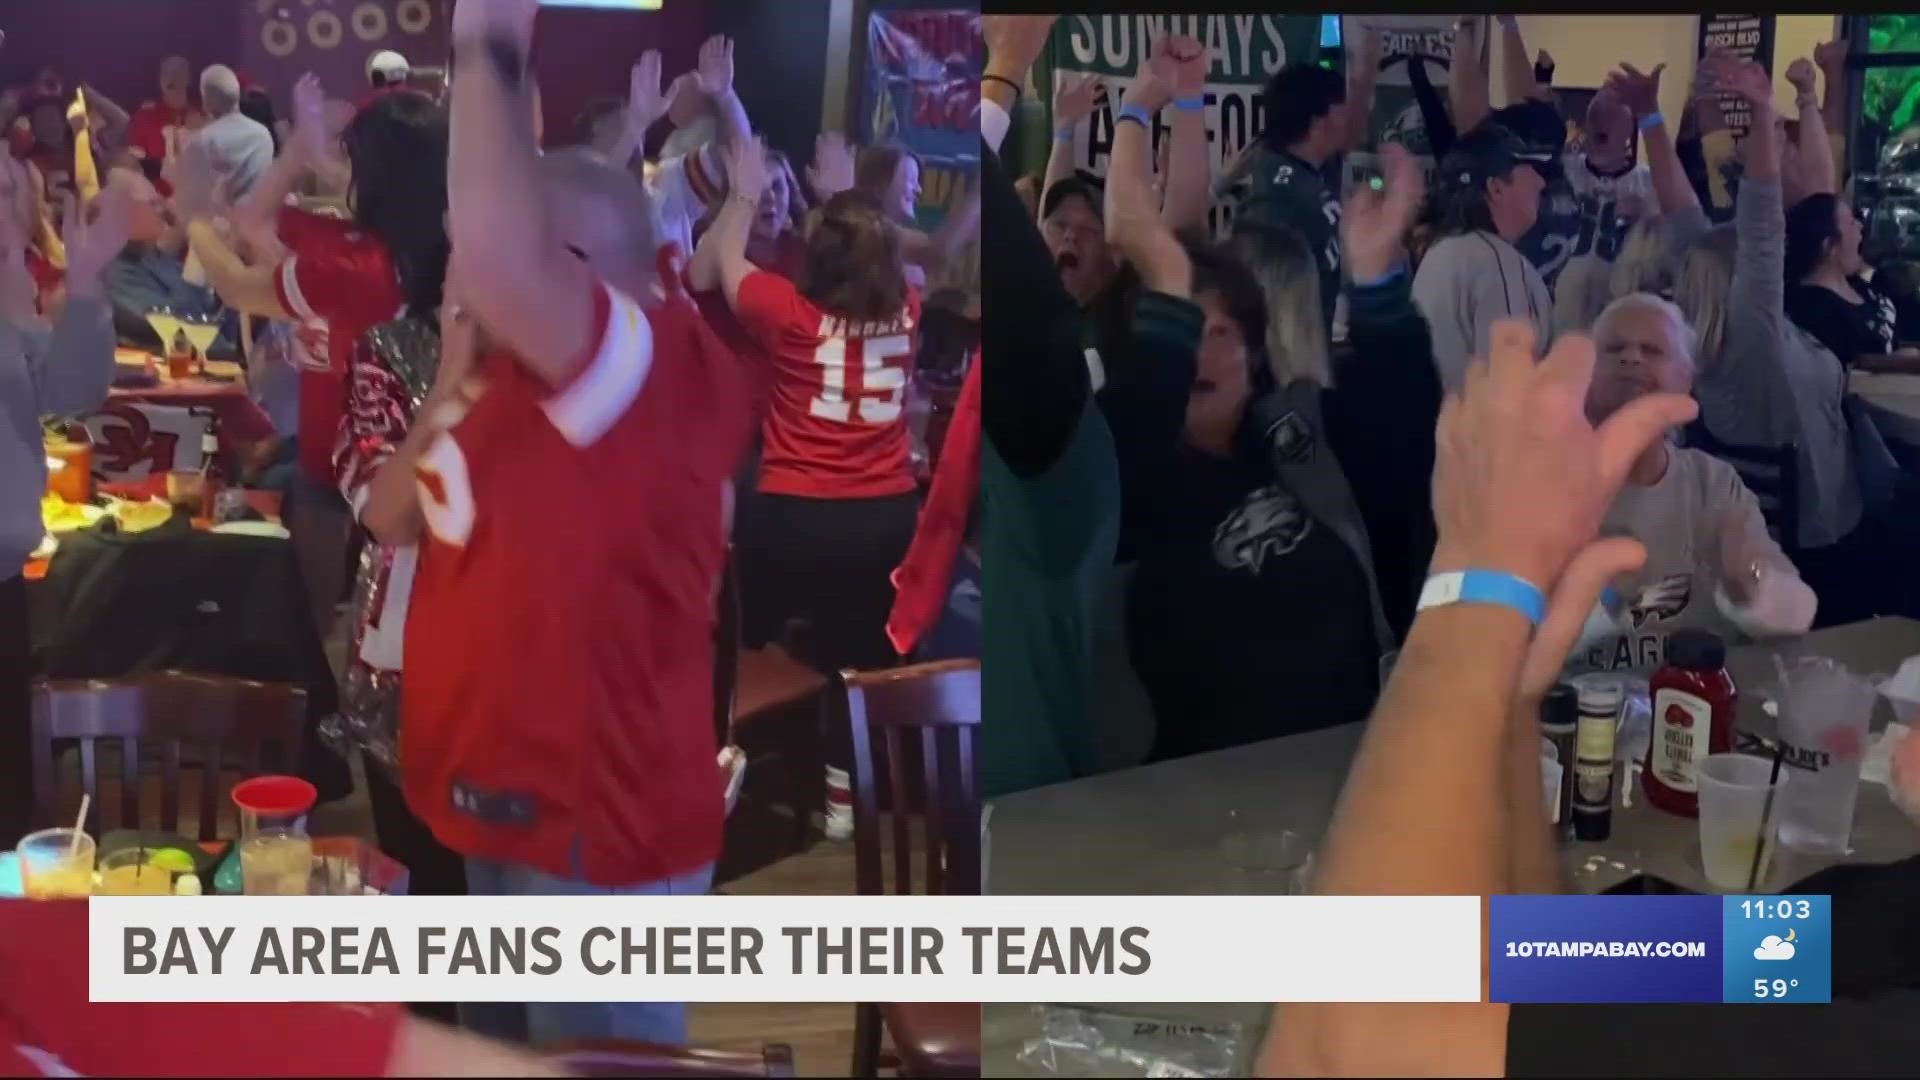 Tampa Bay fans cheering on the Kansas City Chiefs and Philadelphia Eagles had reasons to celebrate throughout the night during Super Bowl LVII.